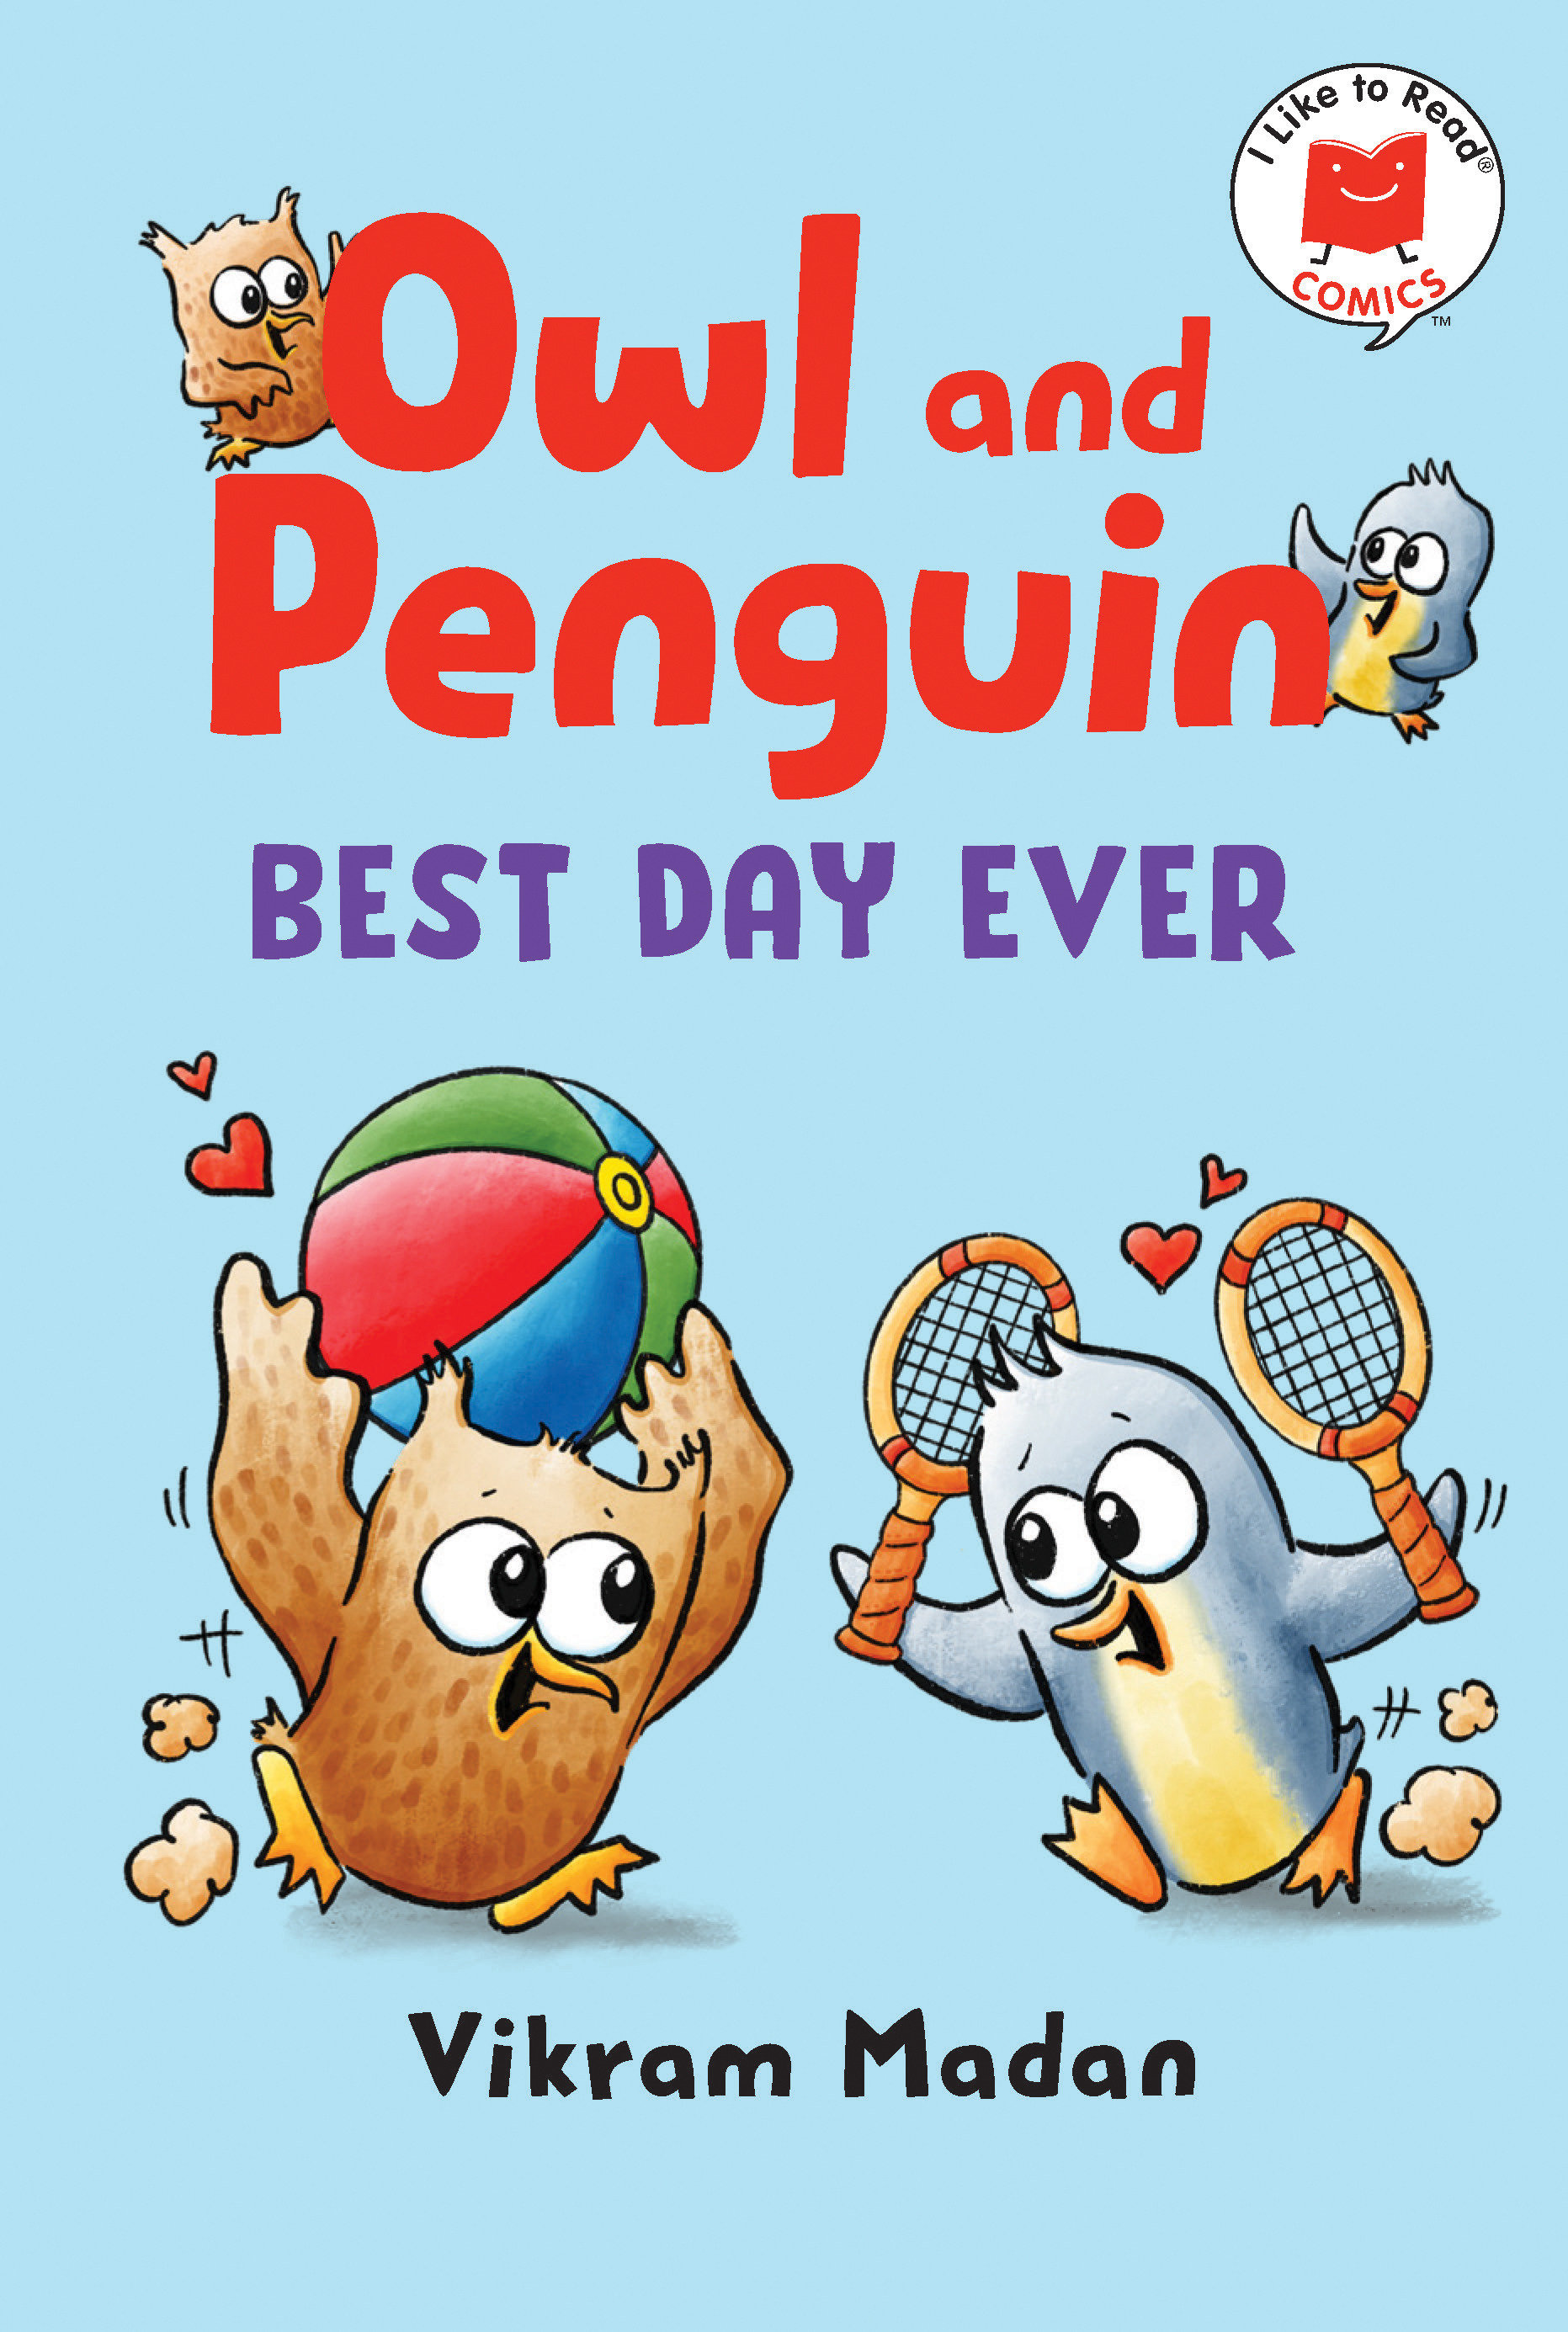 I Like to Read Comics Hardcover Graphic Novel Volume 5 Owl and Penguin Best Day Ever